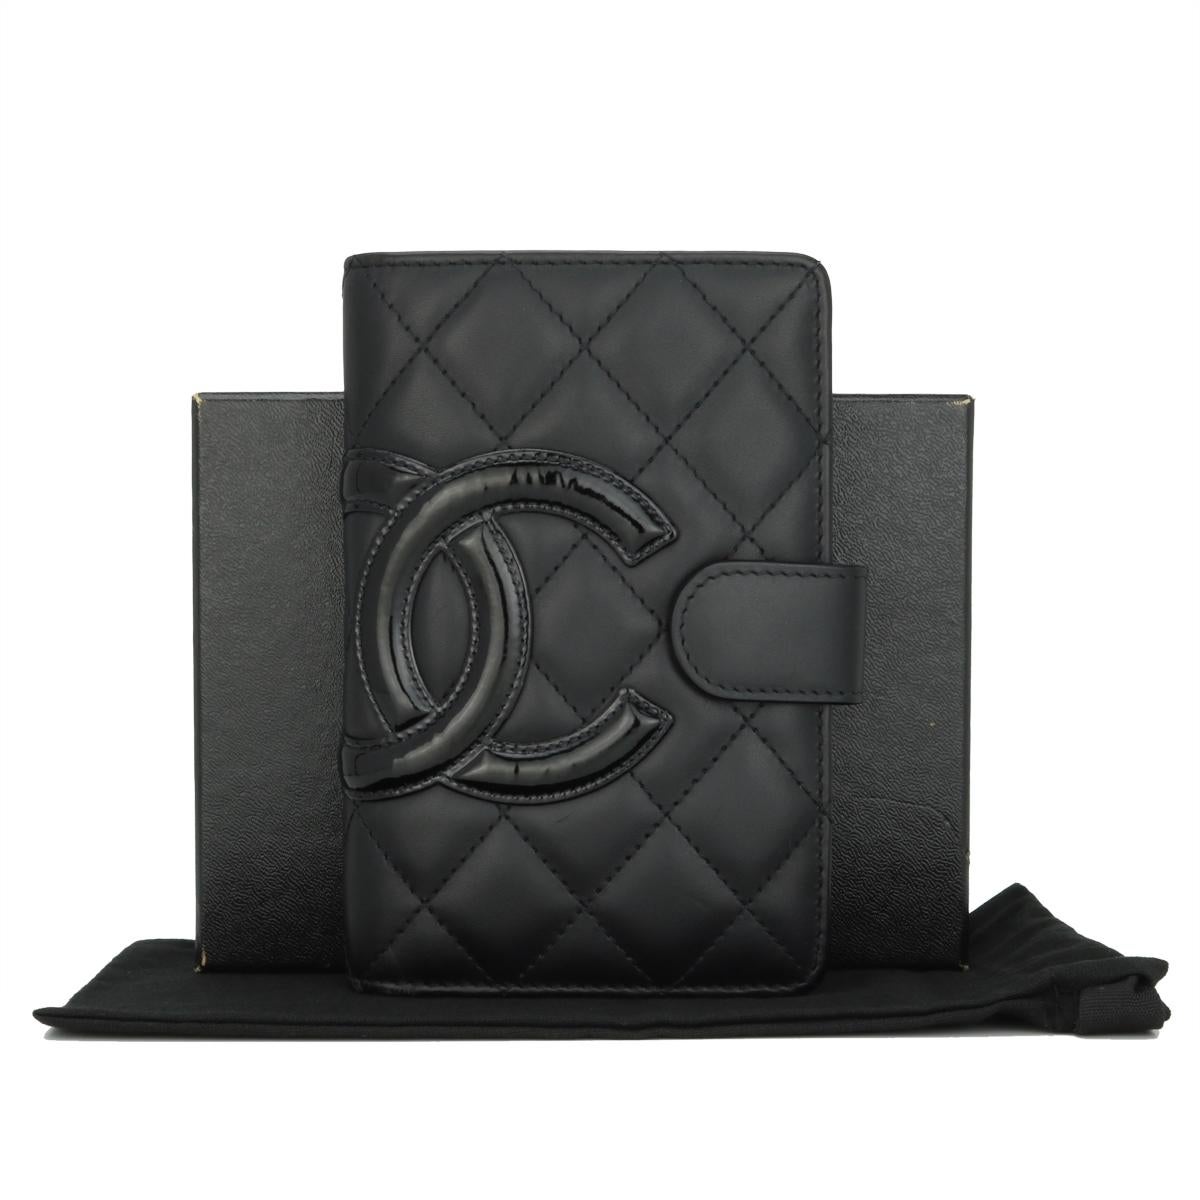 Chanel Quilted Cambon Bifold Medium Zipped Pocket Wallet Black Calfskin with Silver Hardware 2014.

This stunning Cambon wallet is in good condition, the wallet still holds its original shape, and the hardware is still very shiny.

- Exterior